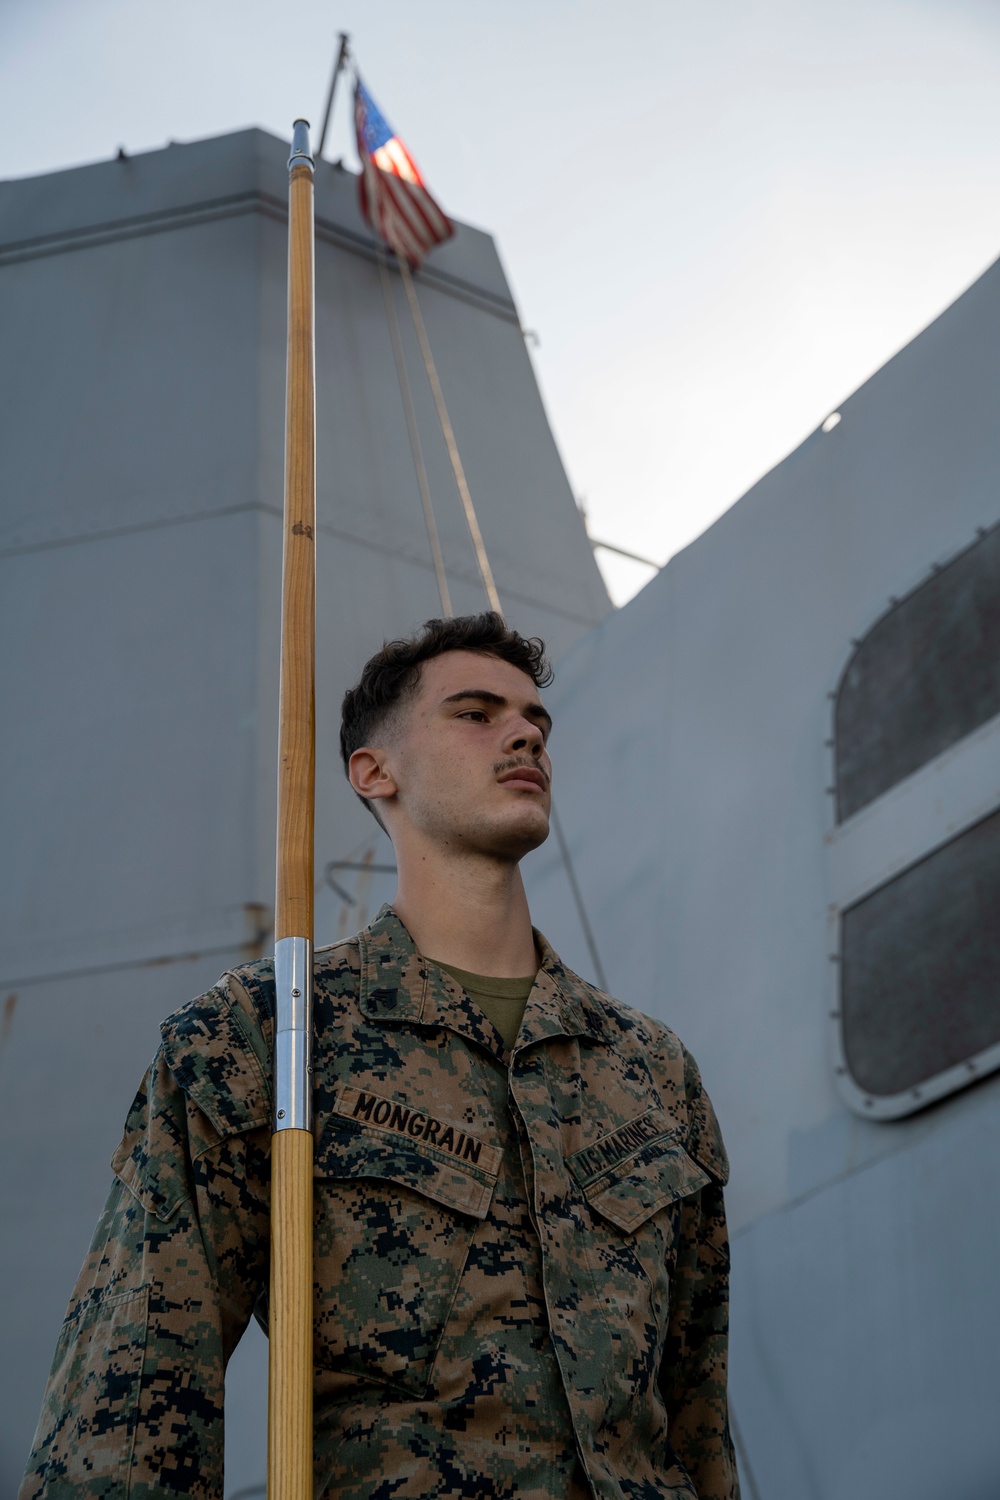 Corporals Course Marines test their drill skills